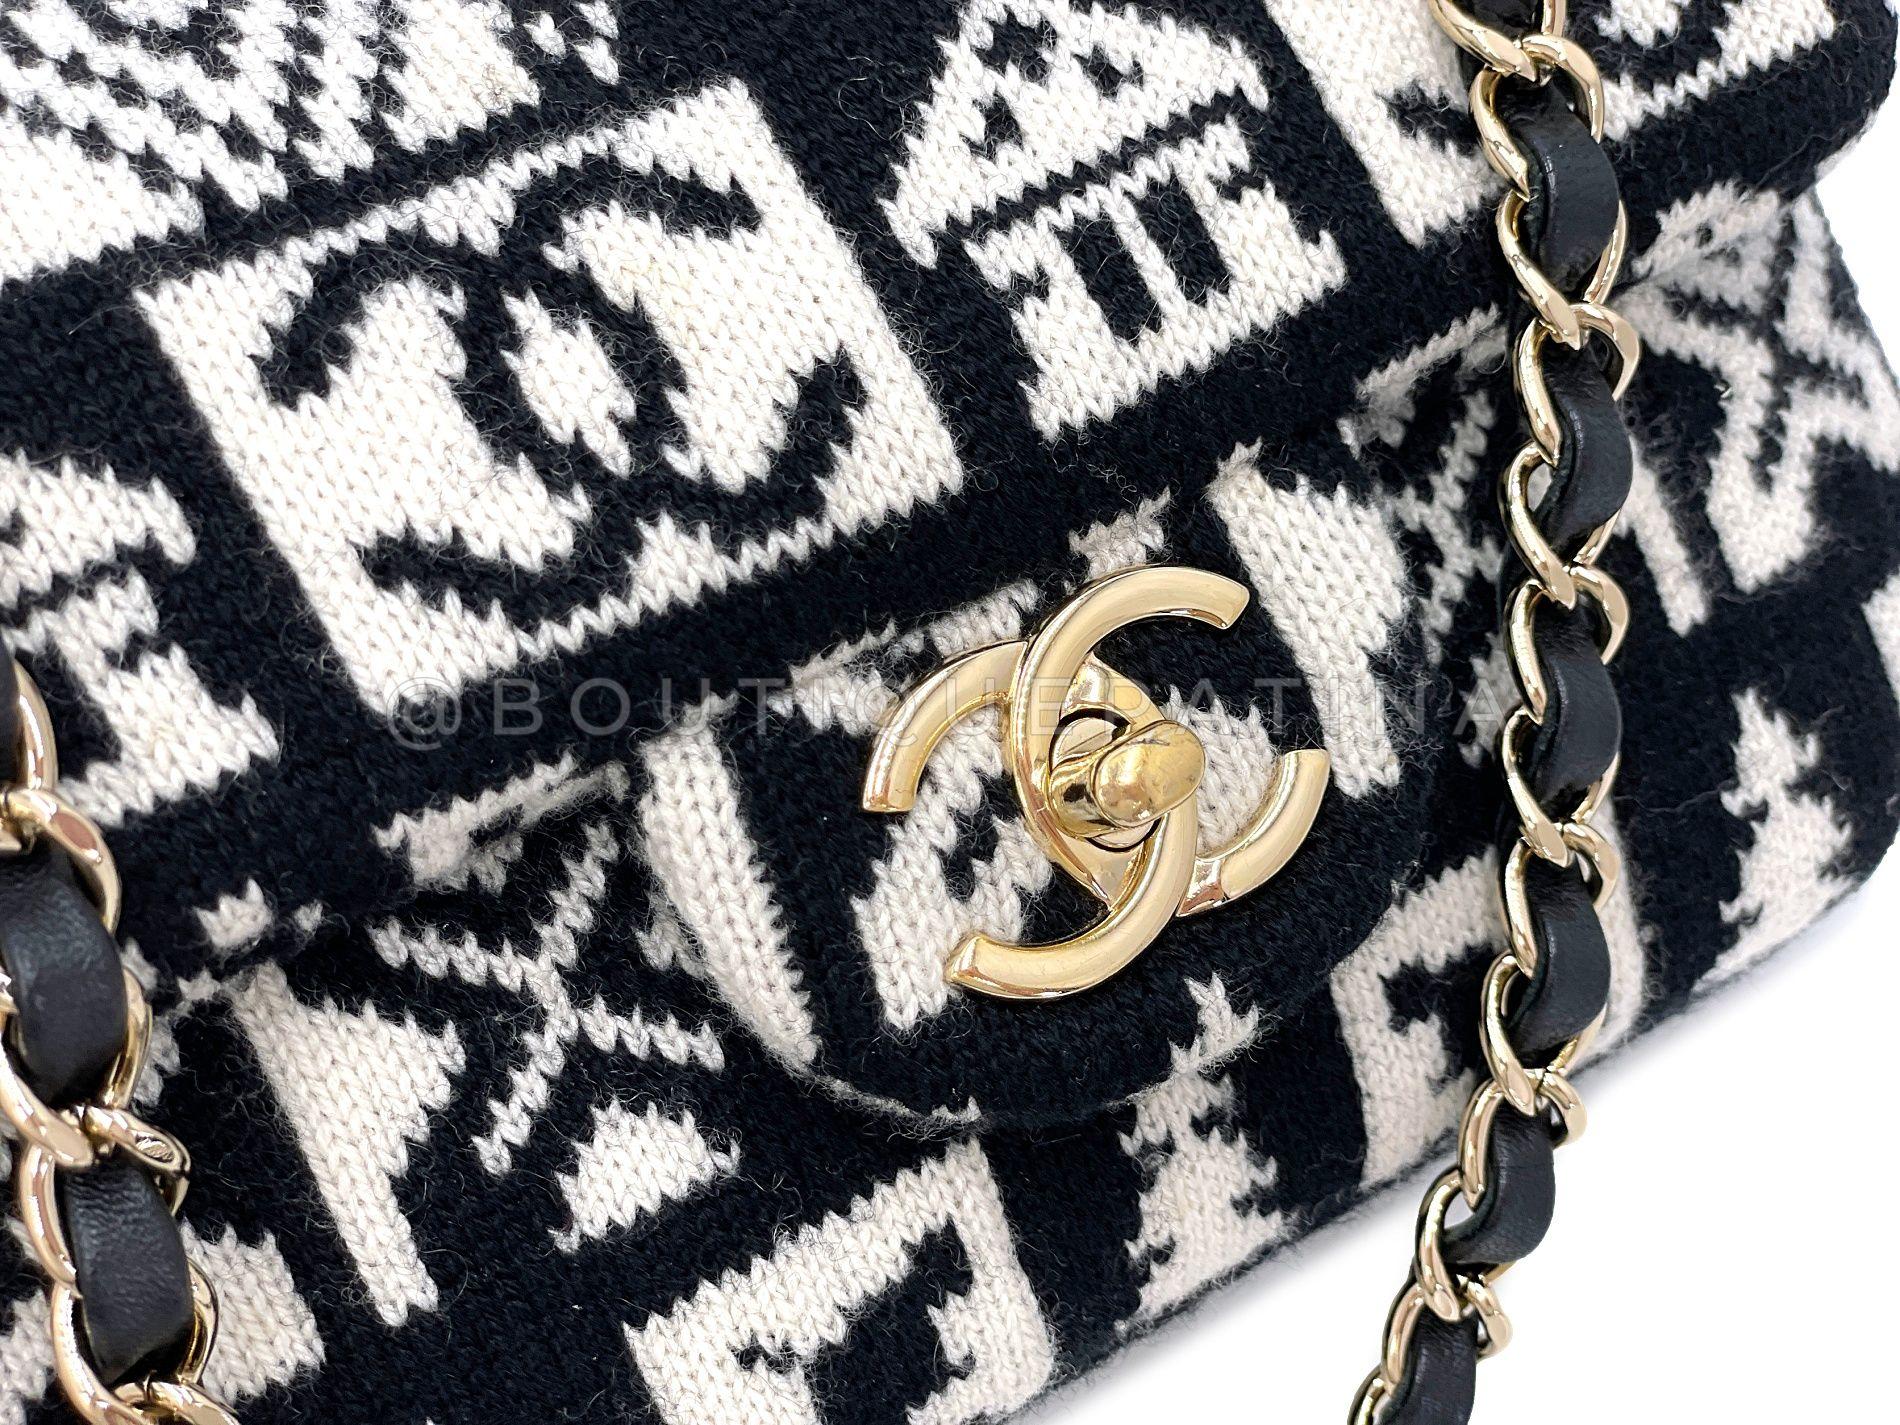 Chanel Coco Neige Rectangular Mini Flap Bag Cashmere Knit 68052 For Sale 4